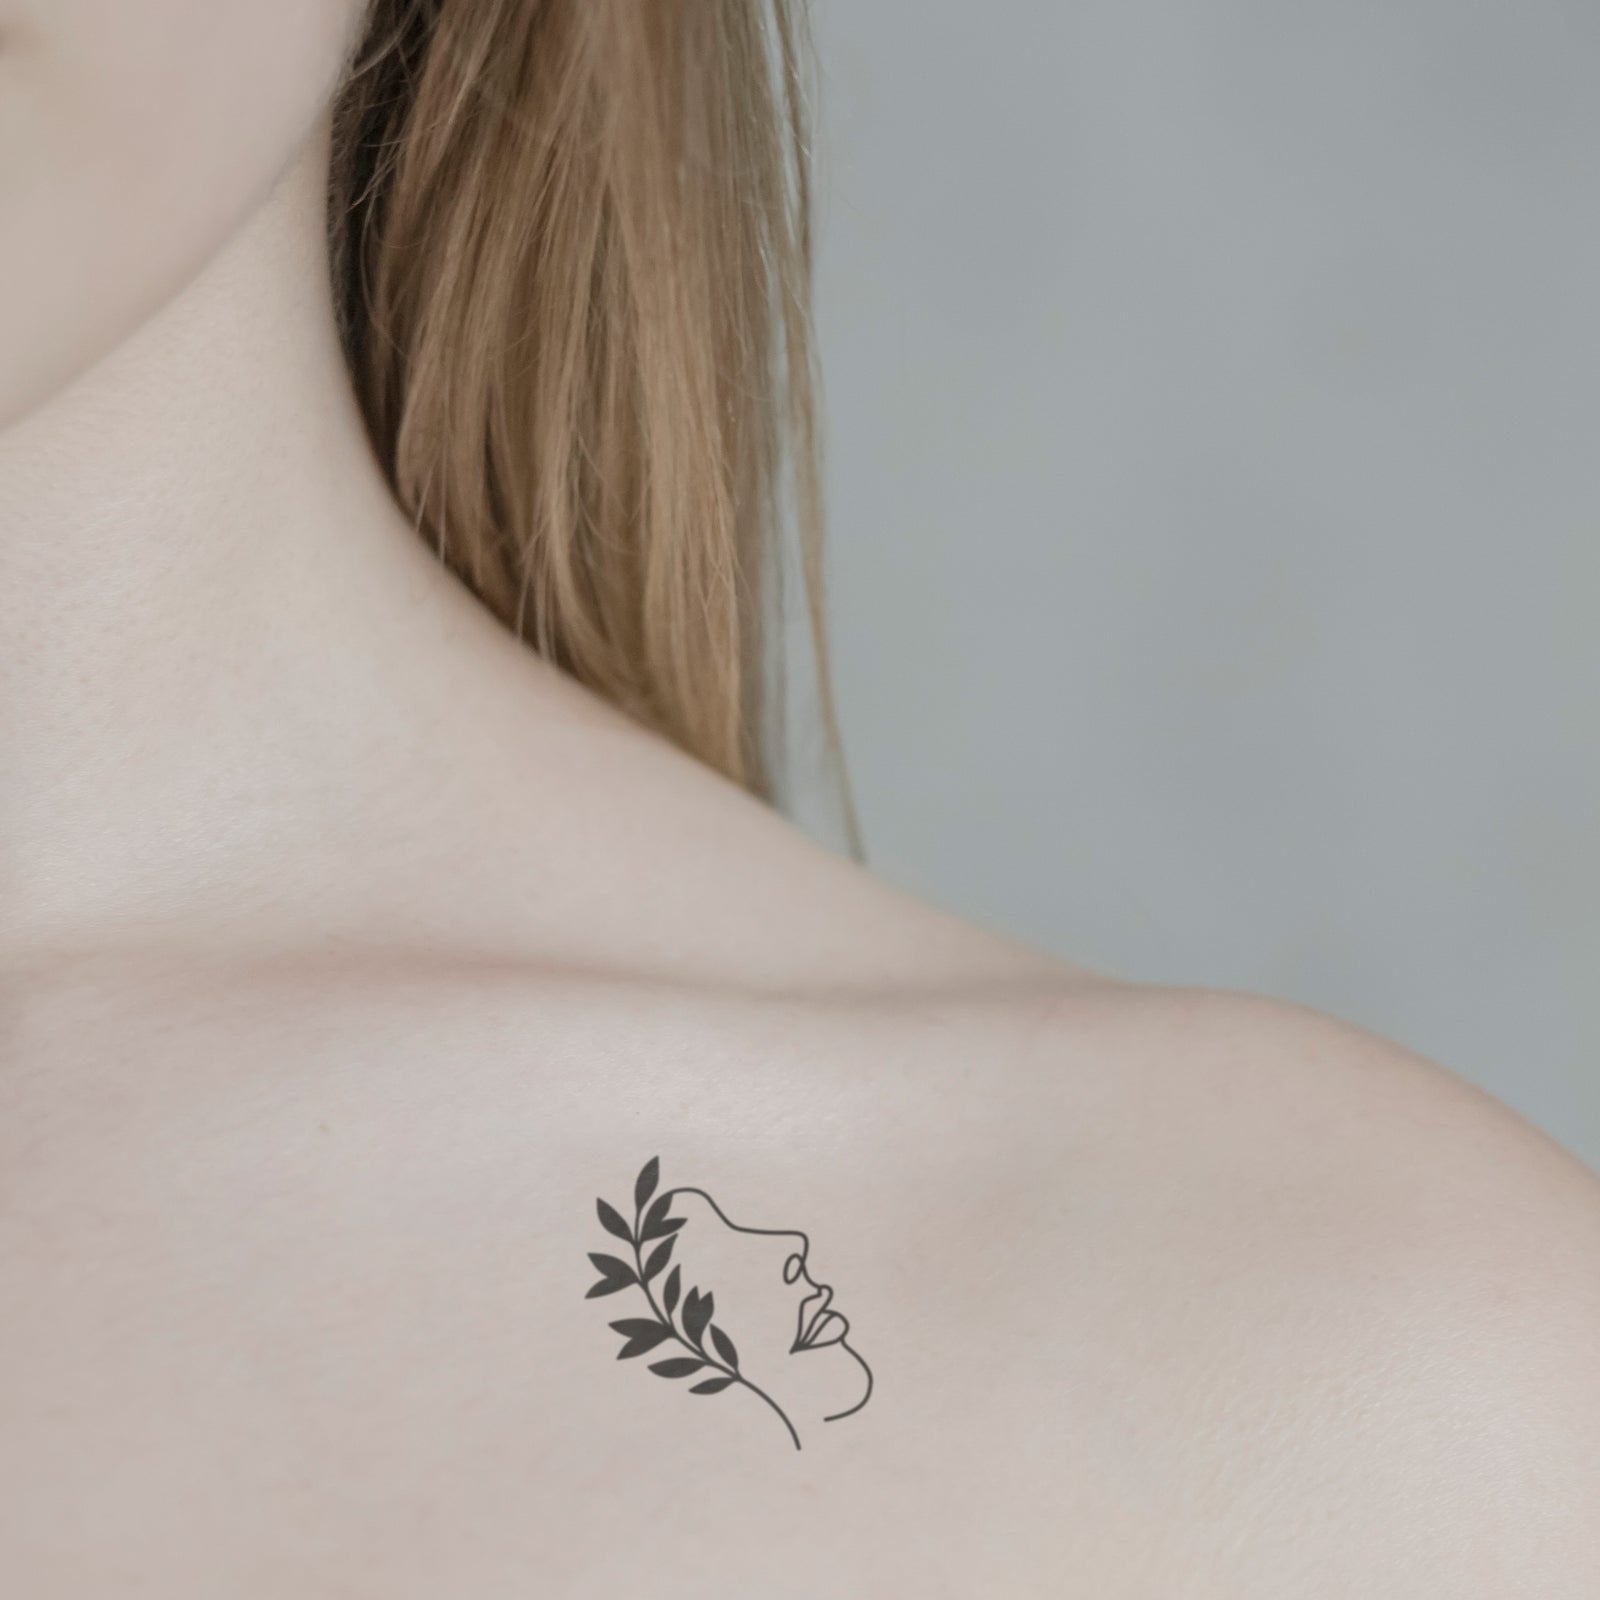 Small tattoos with big meaning - Skin Factory Tattoo & Body Piercing